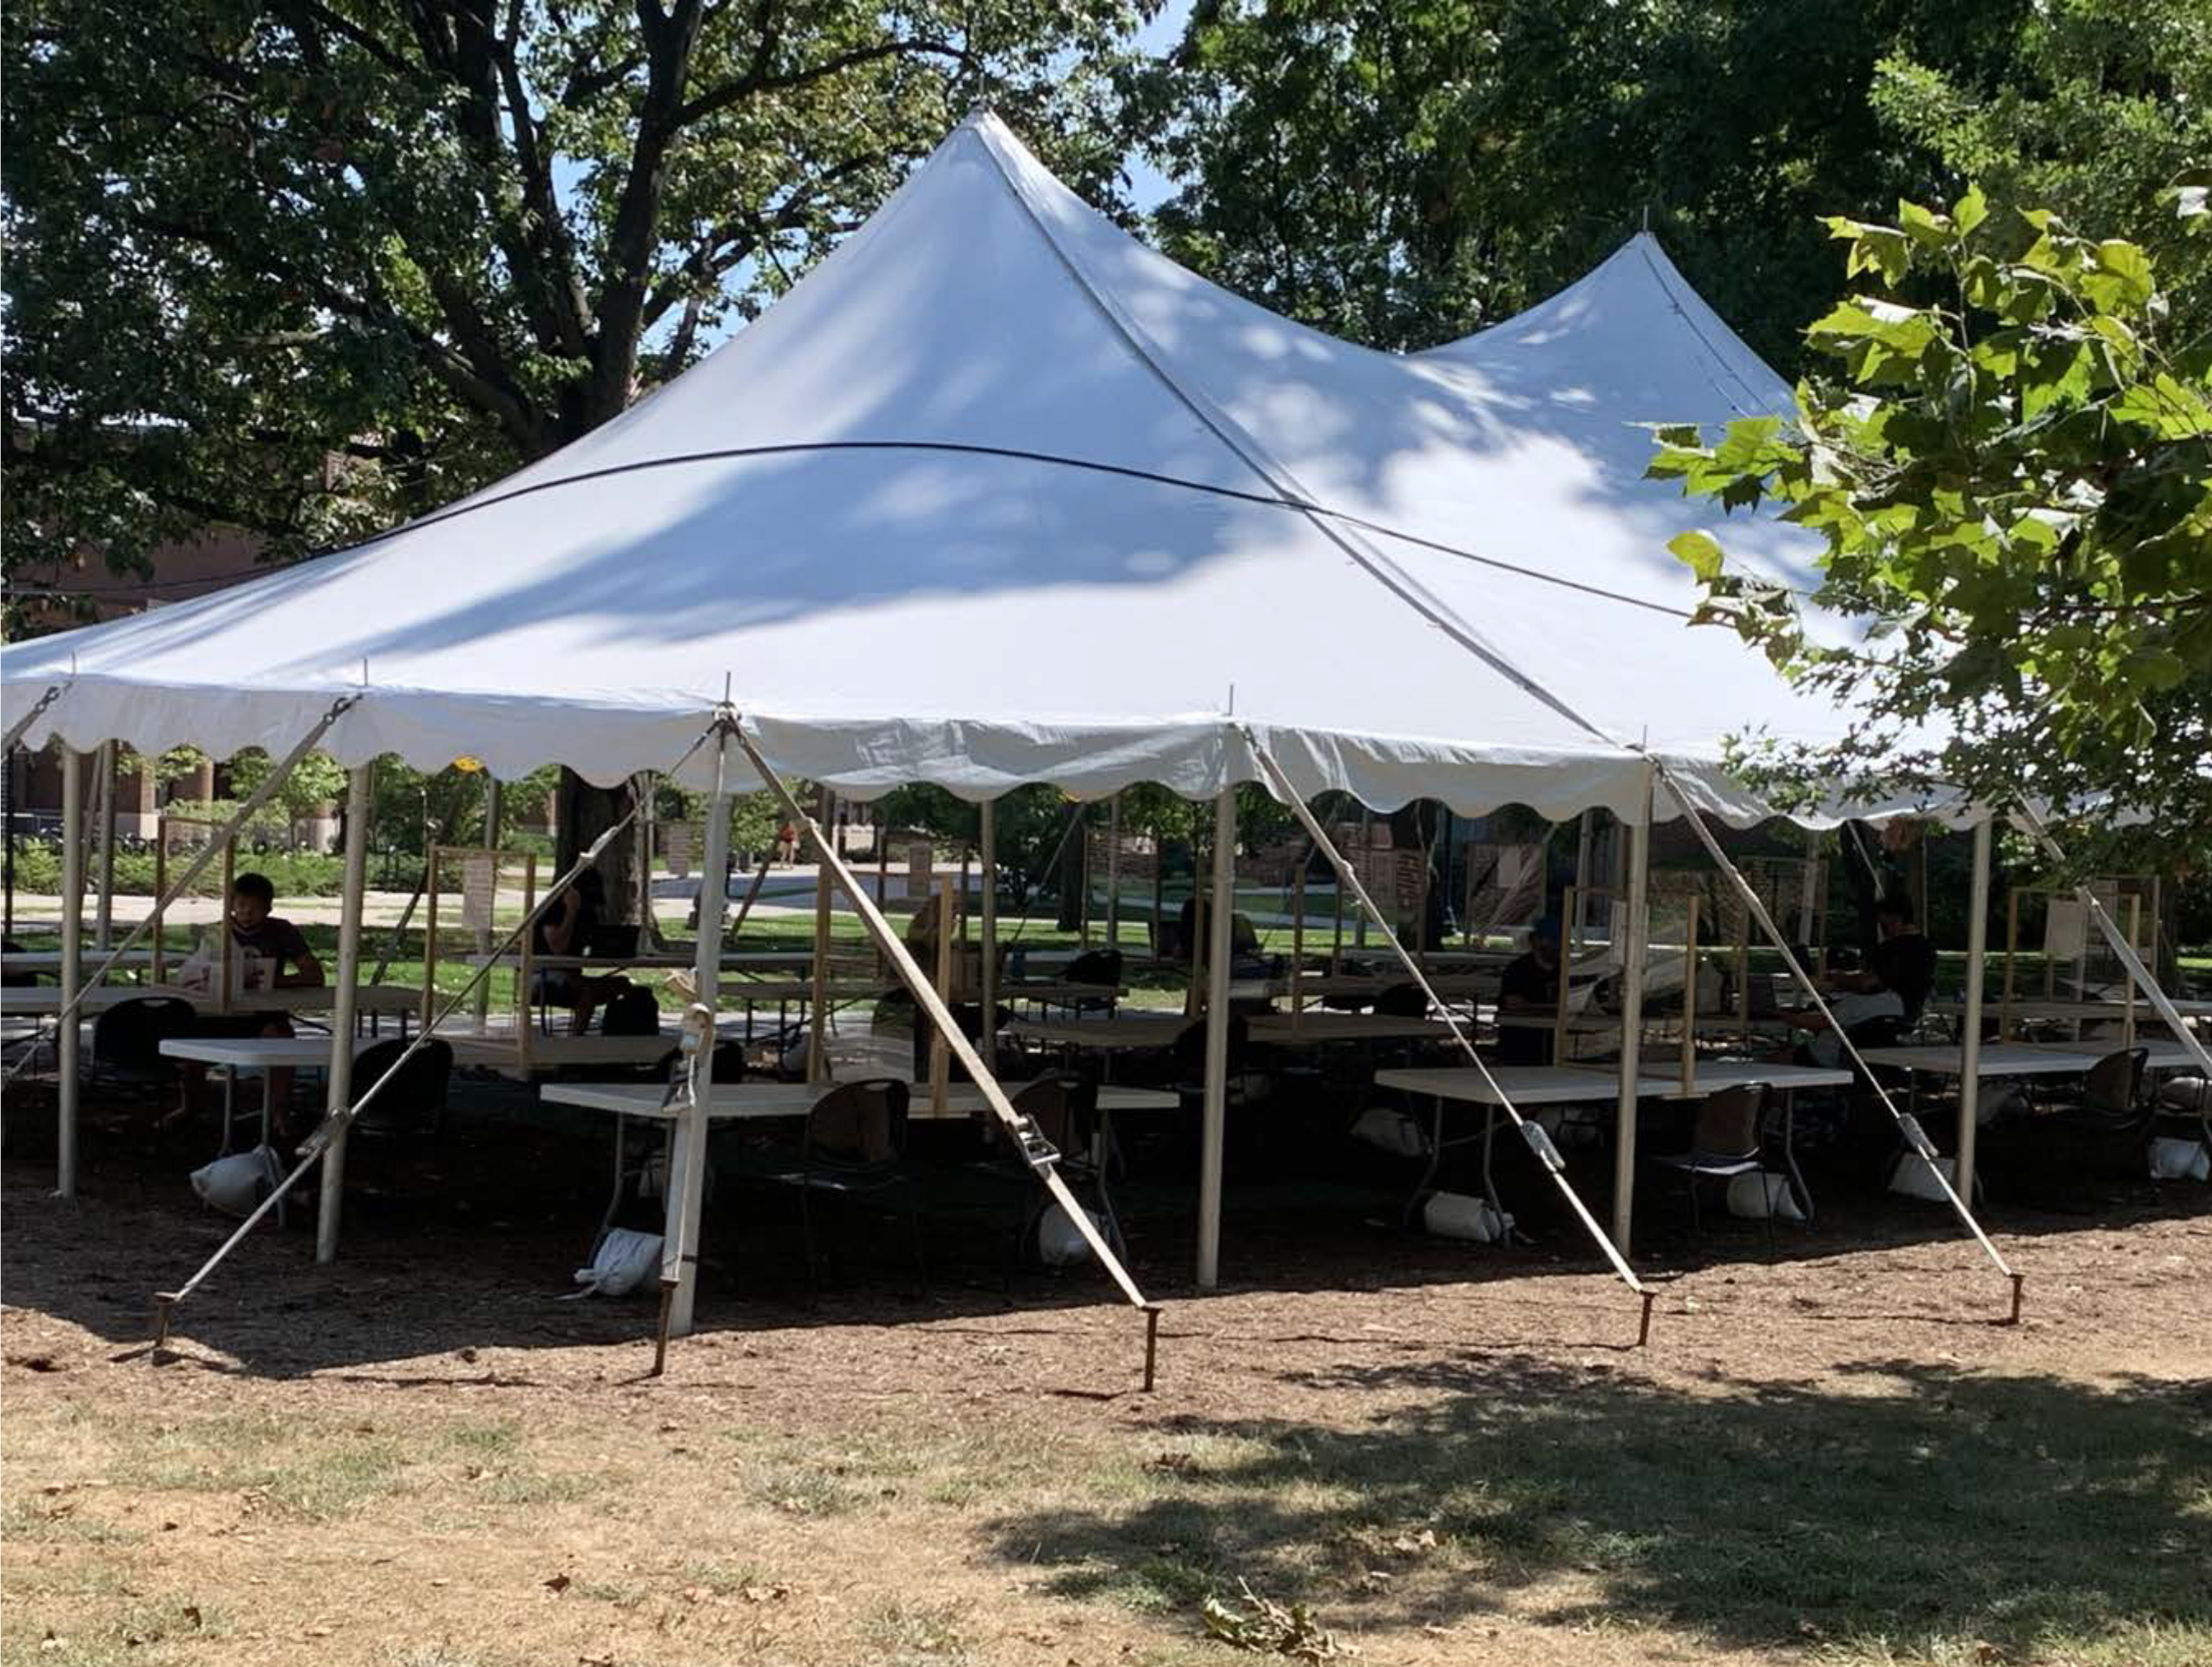 Open dining and studying tents dot the campus landscape